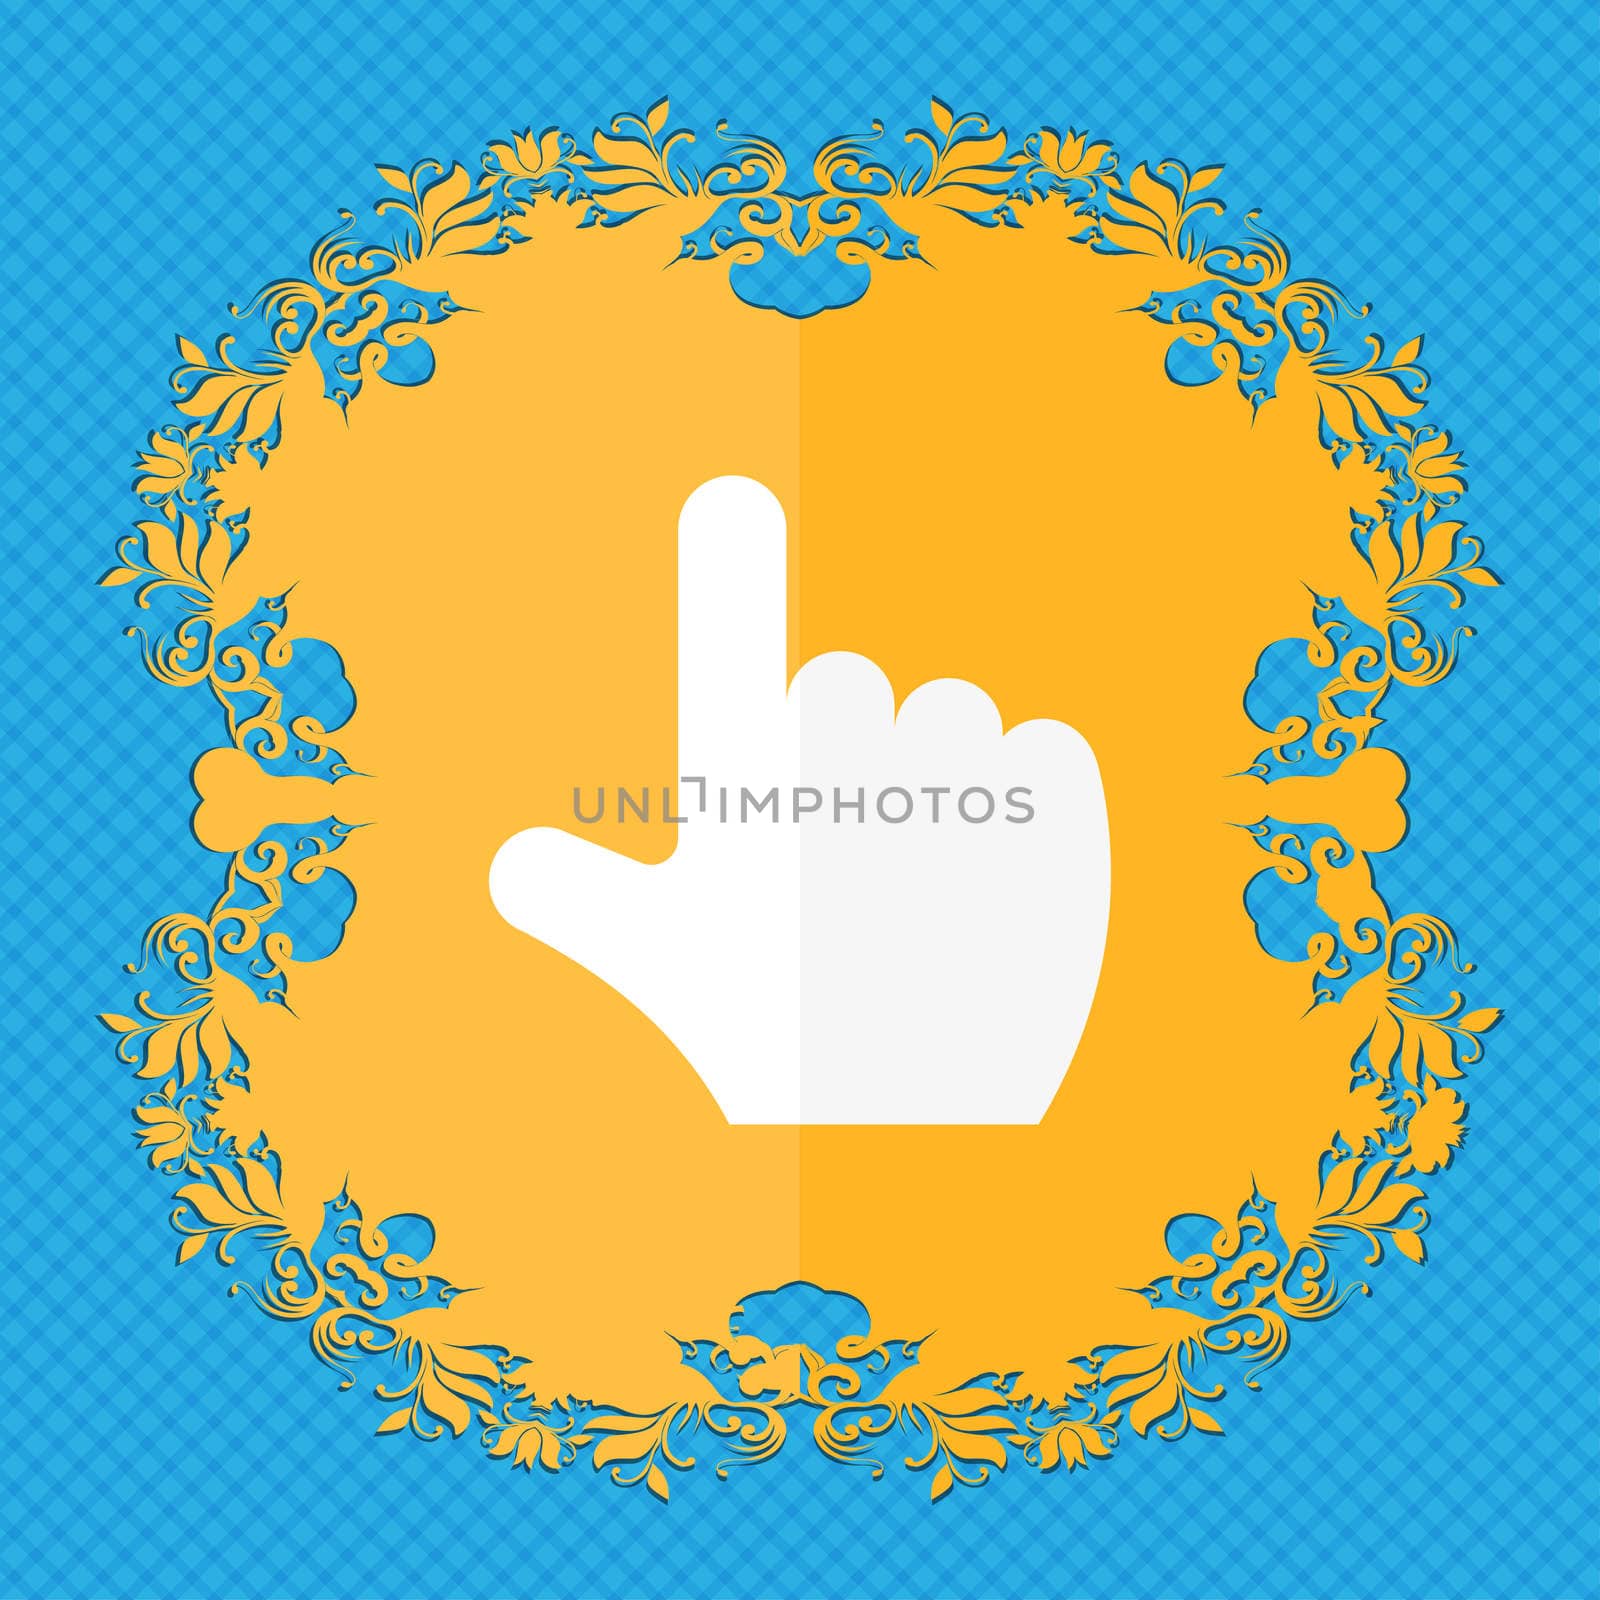 pointing hand . Floral flat design on a blue abstract background with place for your text. illustration